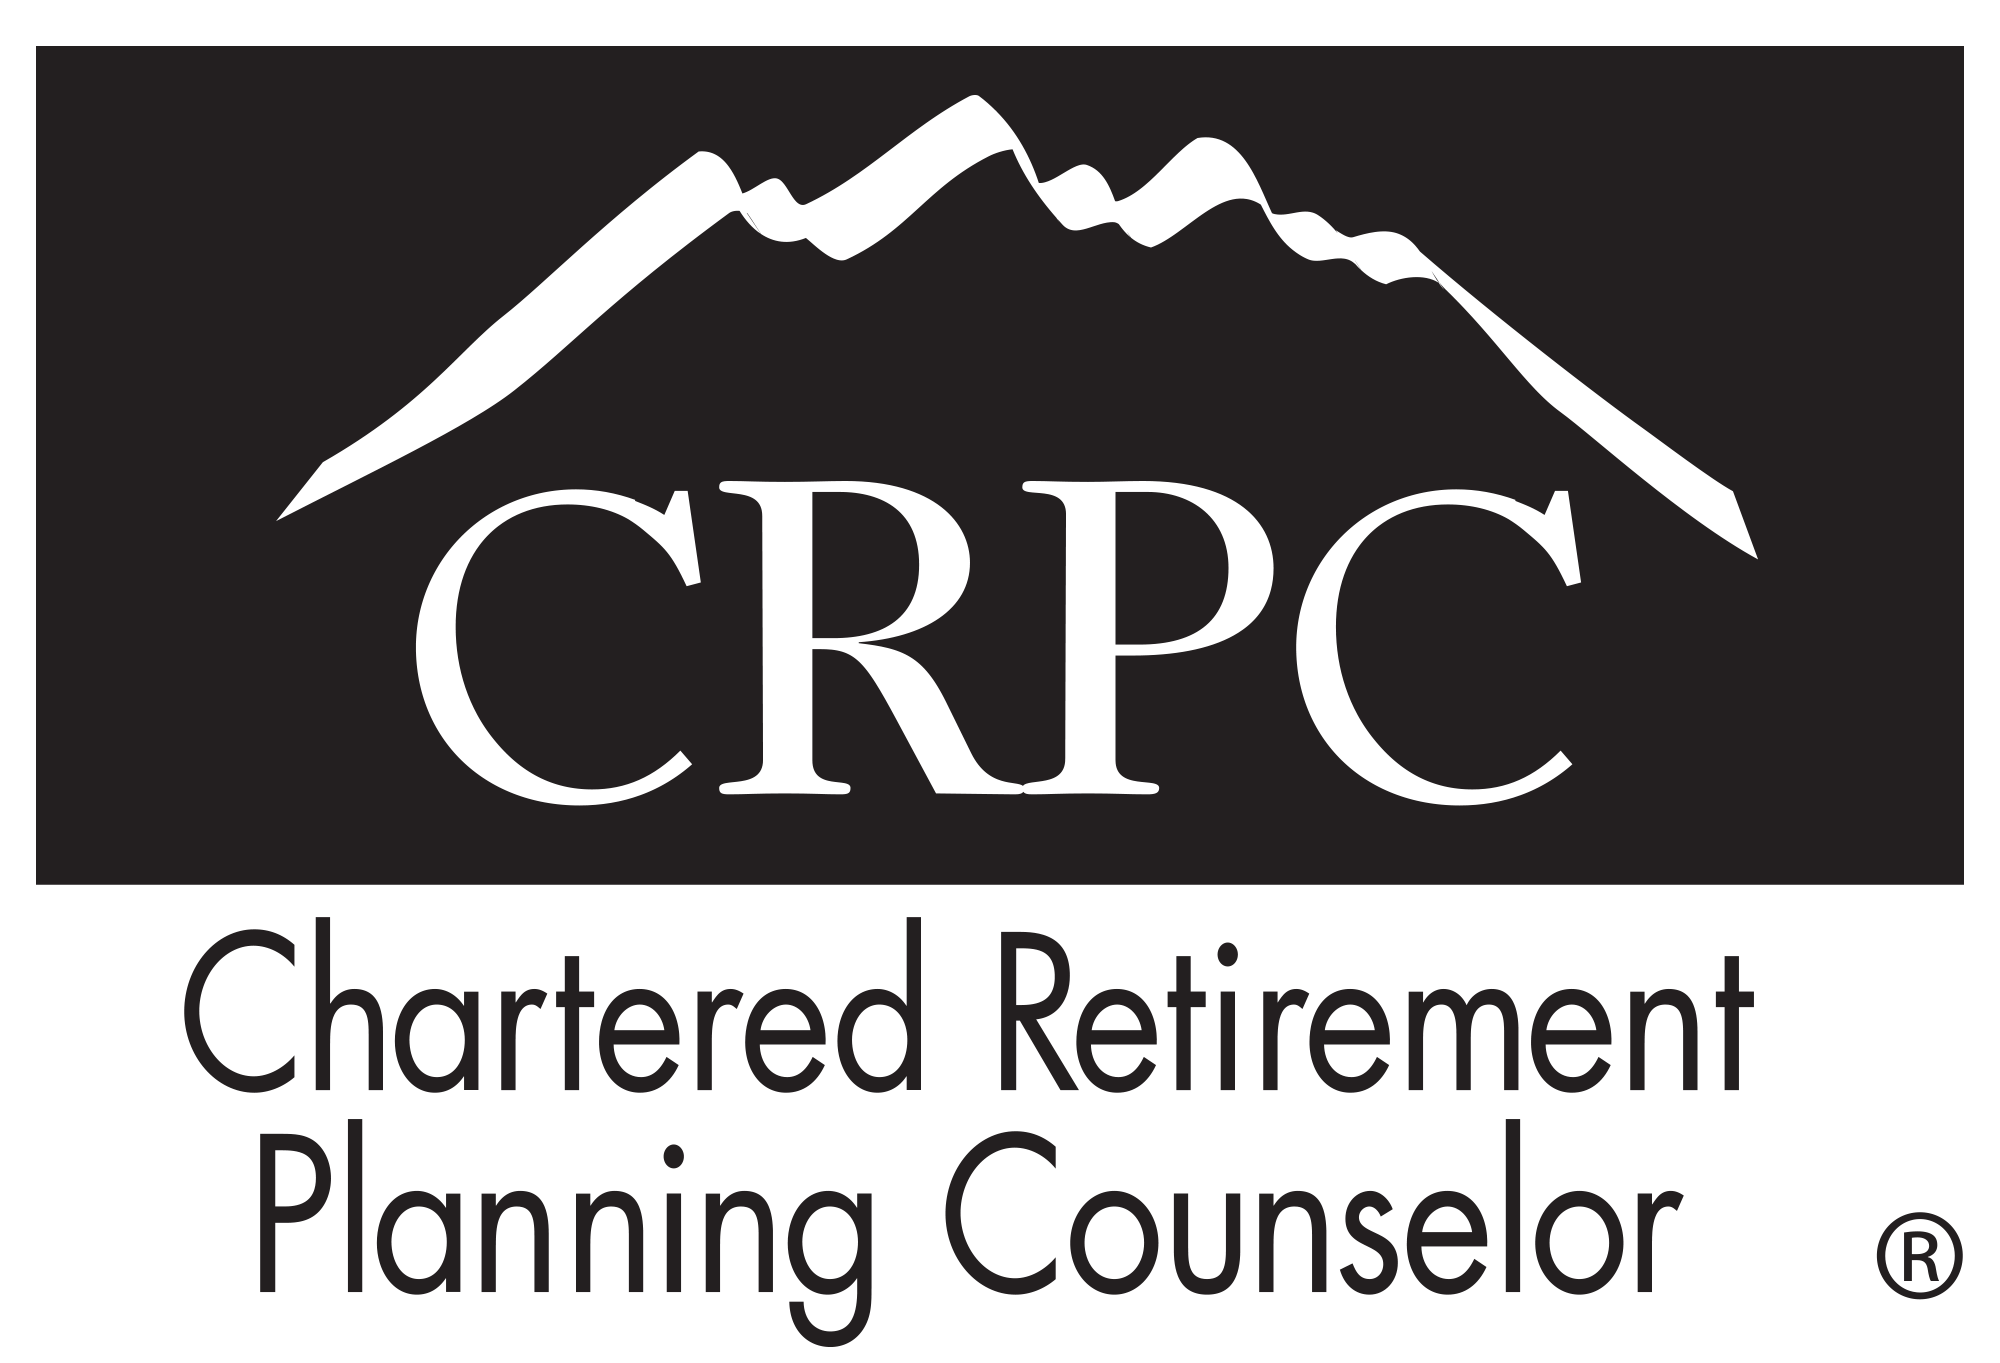 Chartered Retirement Planning Counselor